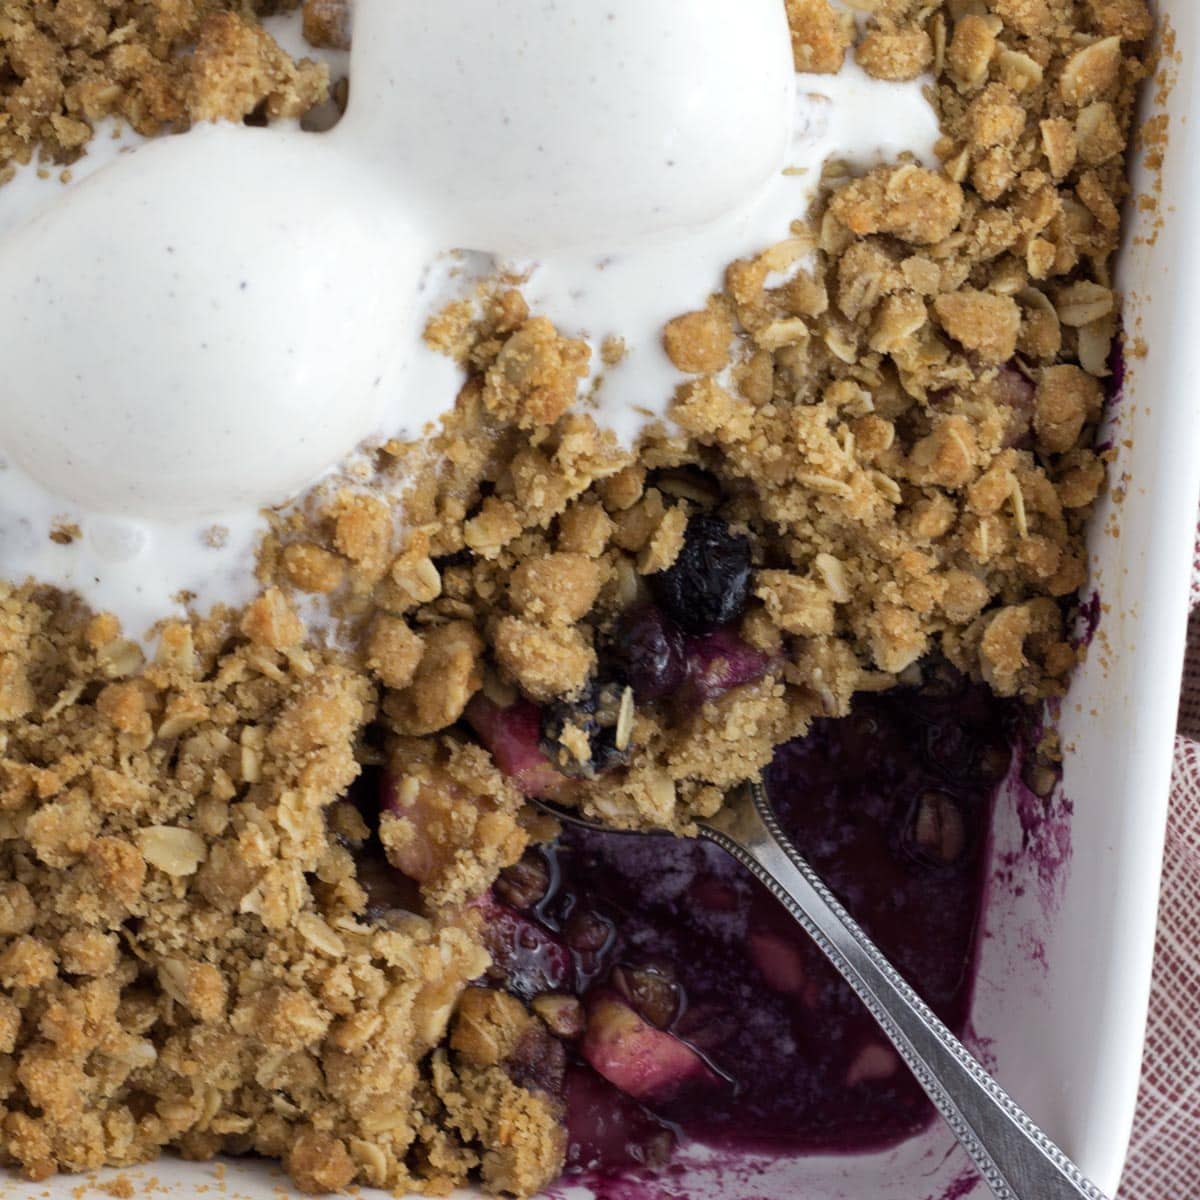 Pan of blueberry apple crumble with ice cream and a serving spoon.